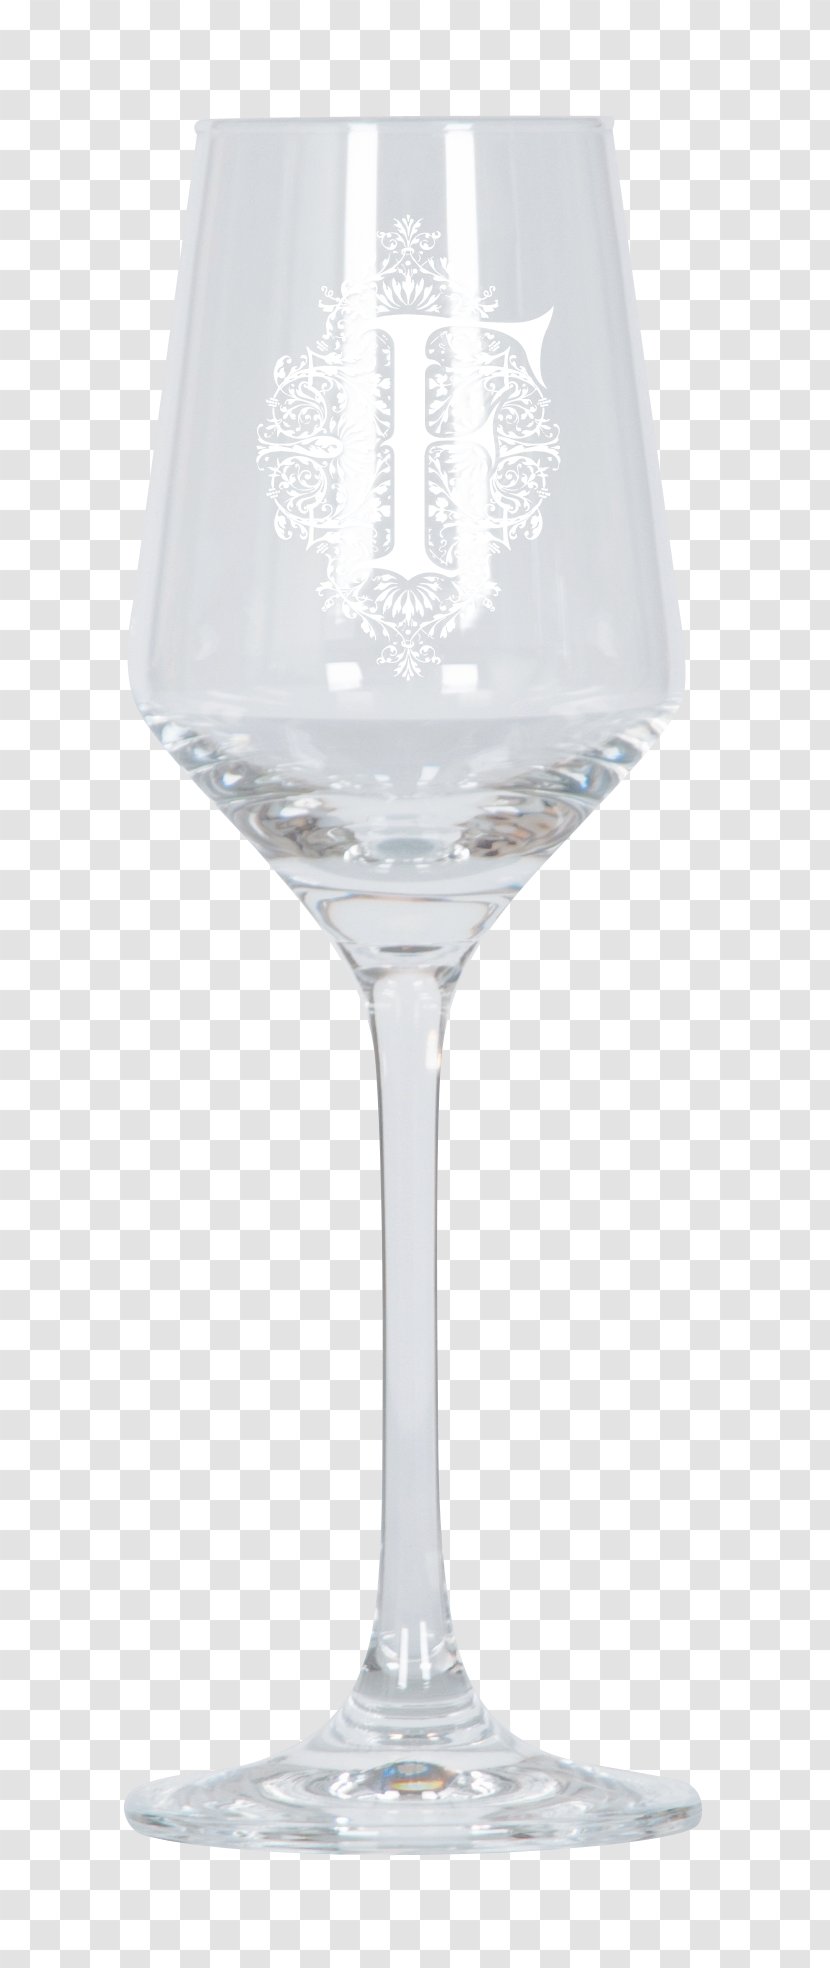 Wine Glass Gin Martini Champagne Transparent PNG